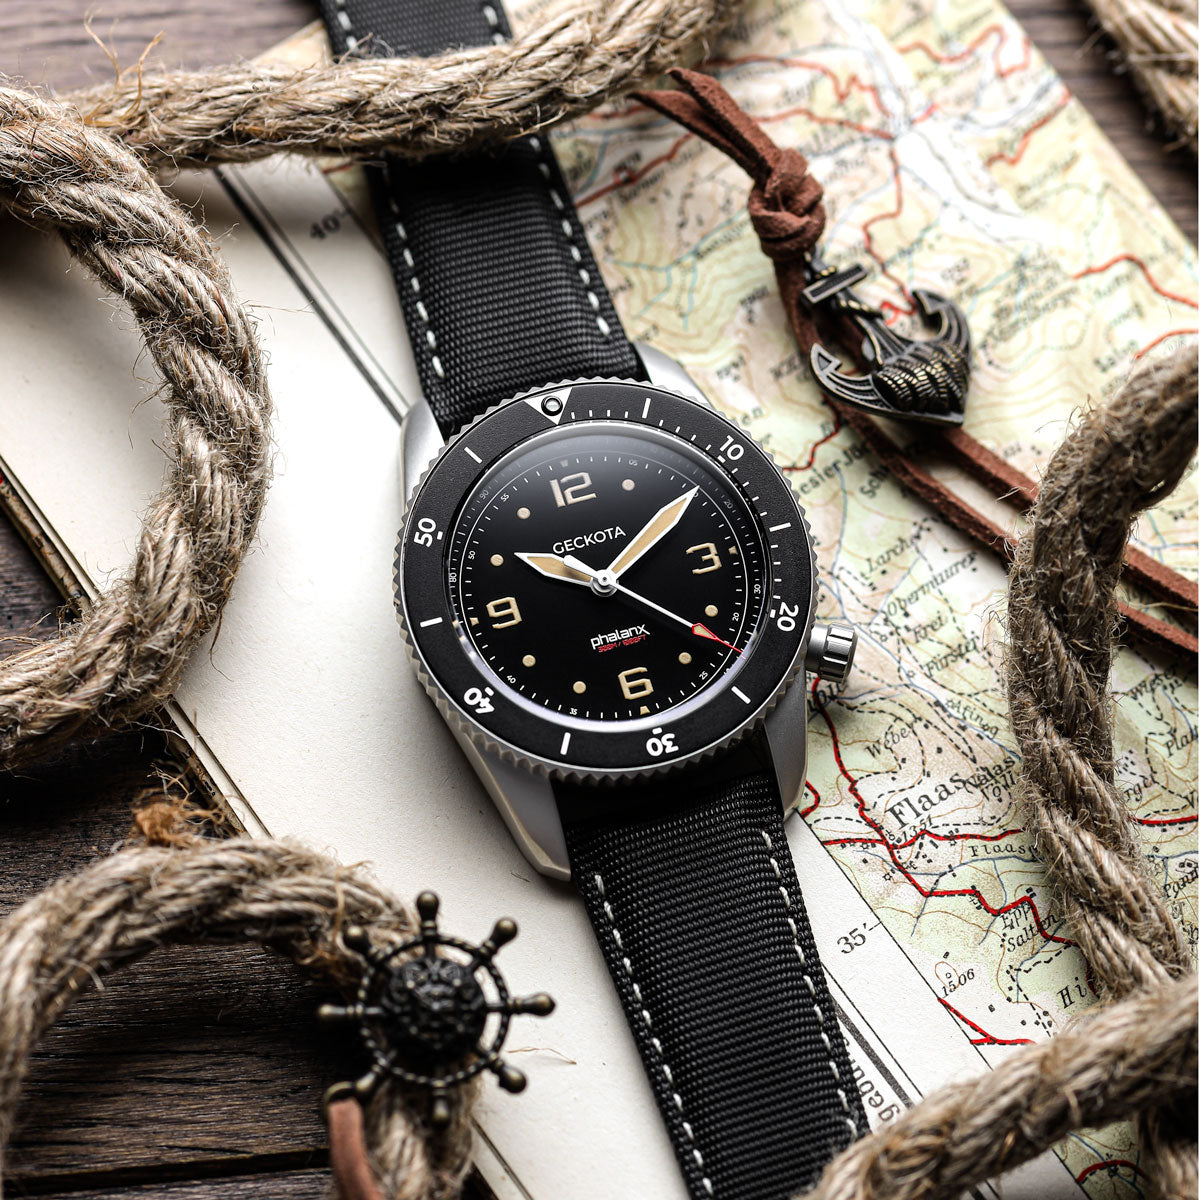 What You Need to Know About Watch Water Resistance – namokiMODS